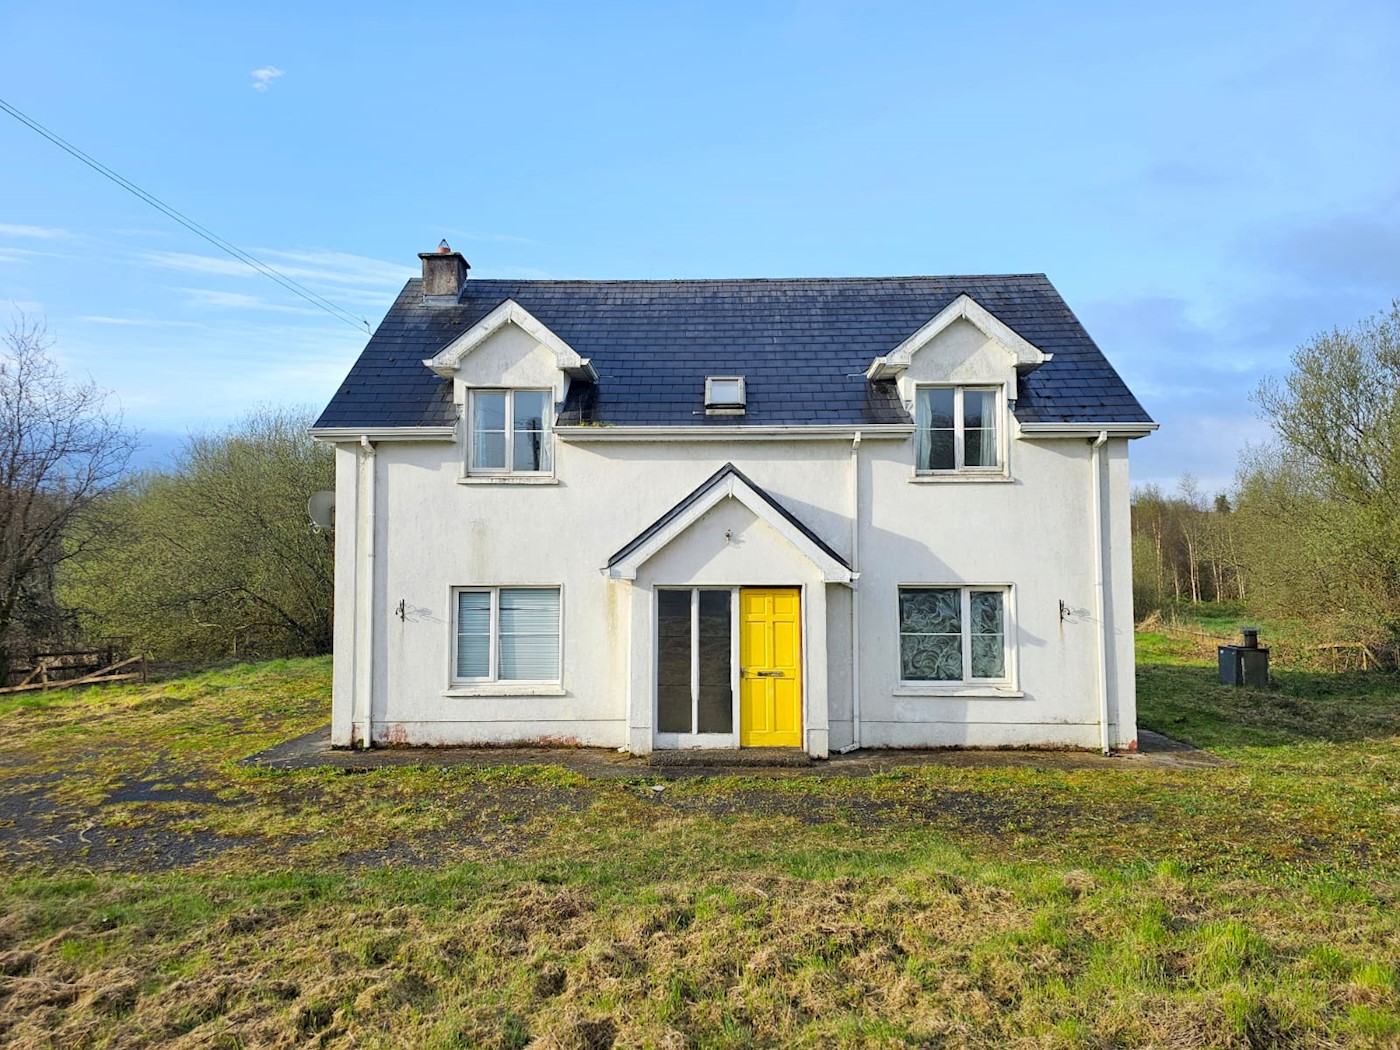 2 Lisconor, Kilclare, Carrick-On-Shannon, Co. Leitrim, N41 T971 1/20